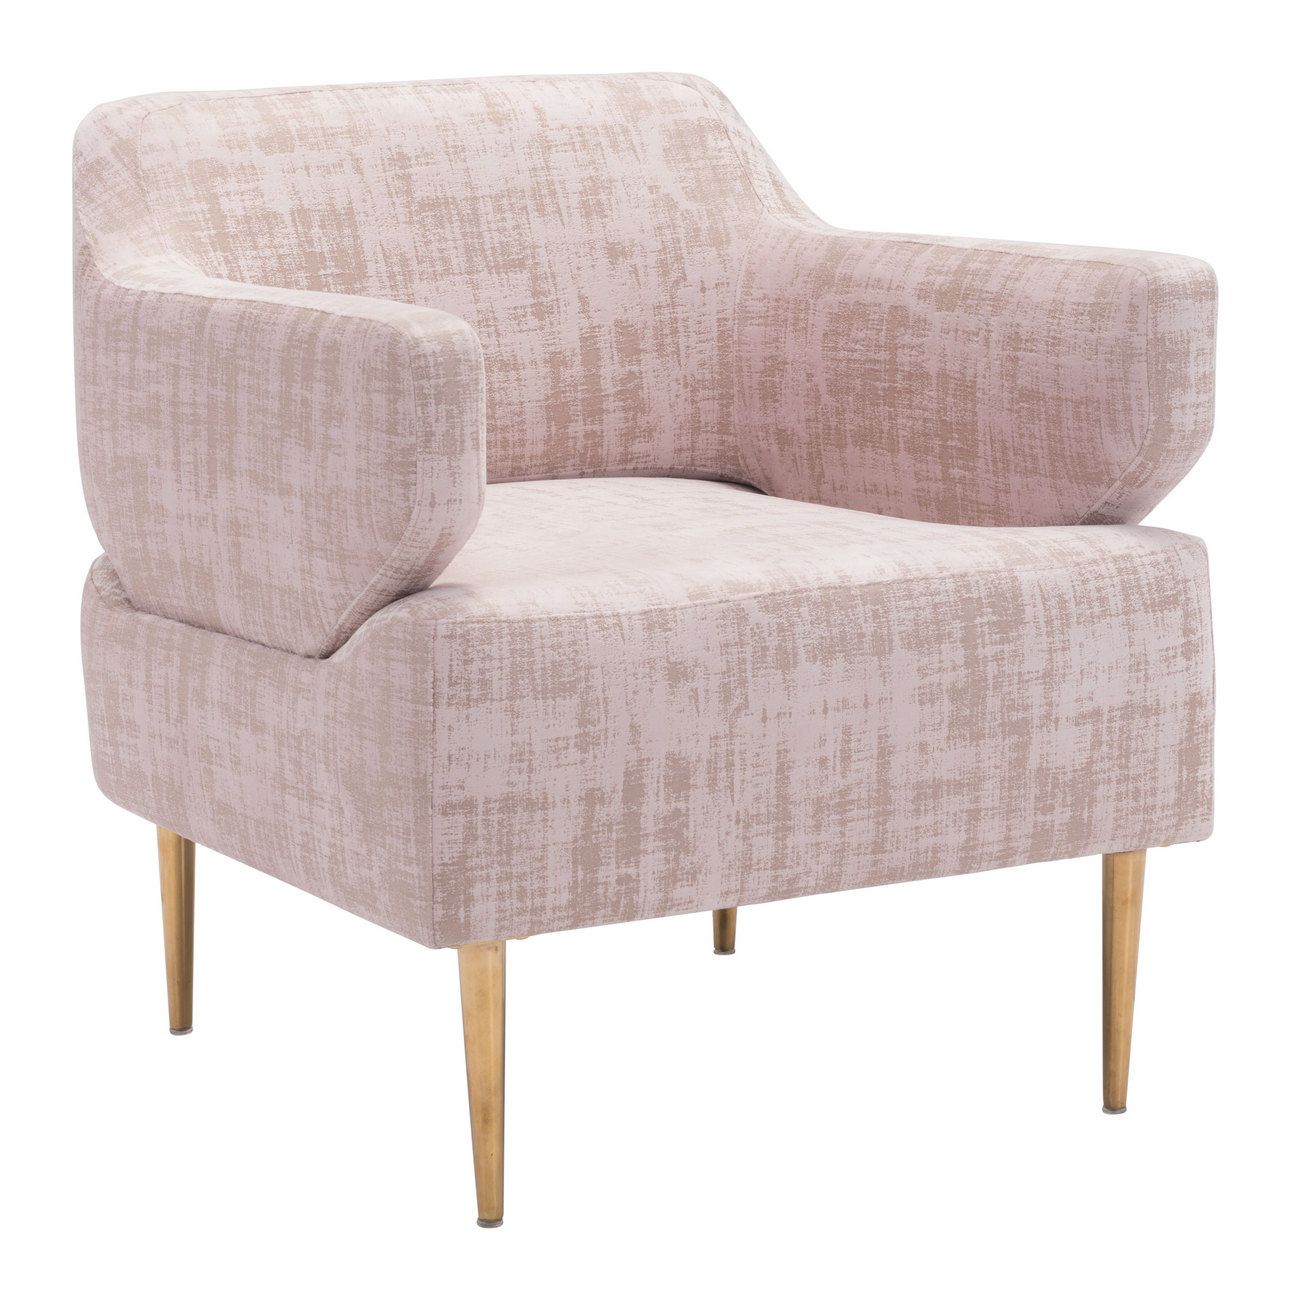 Oasis Arm Chair In Pink Velvet Zuo Modern 101138 Within Didonato Tufted Velvet Armchairs (View 15 of 15)